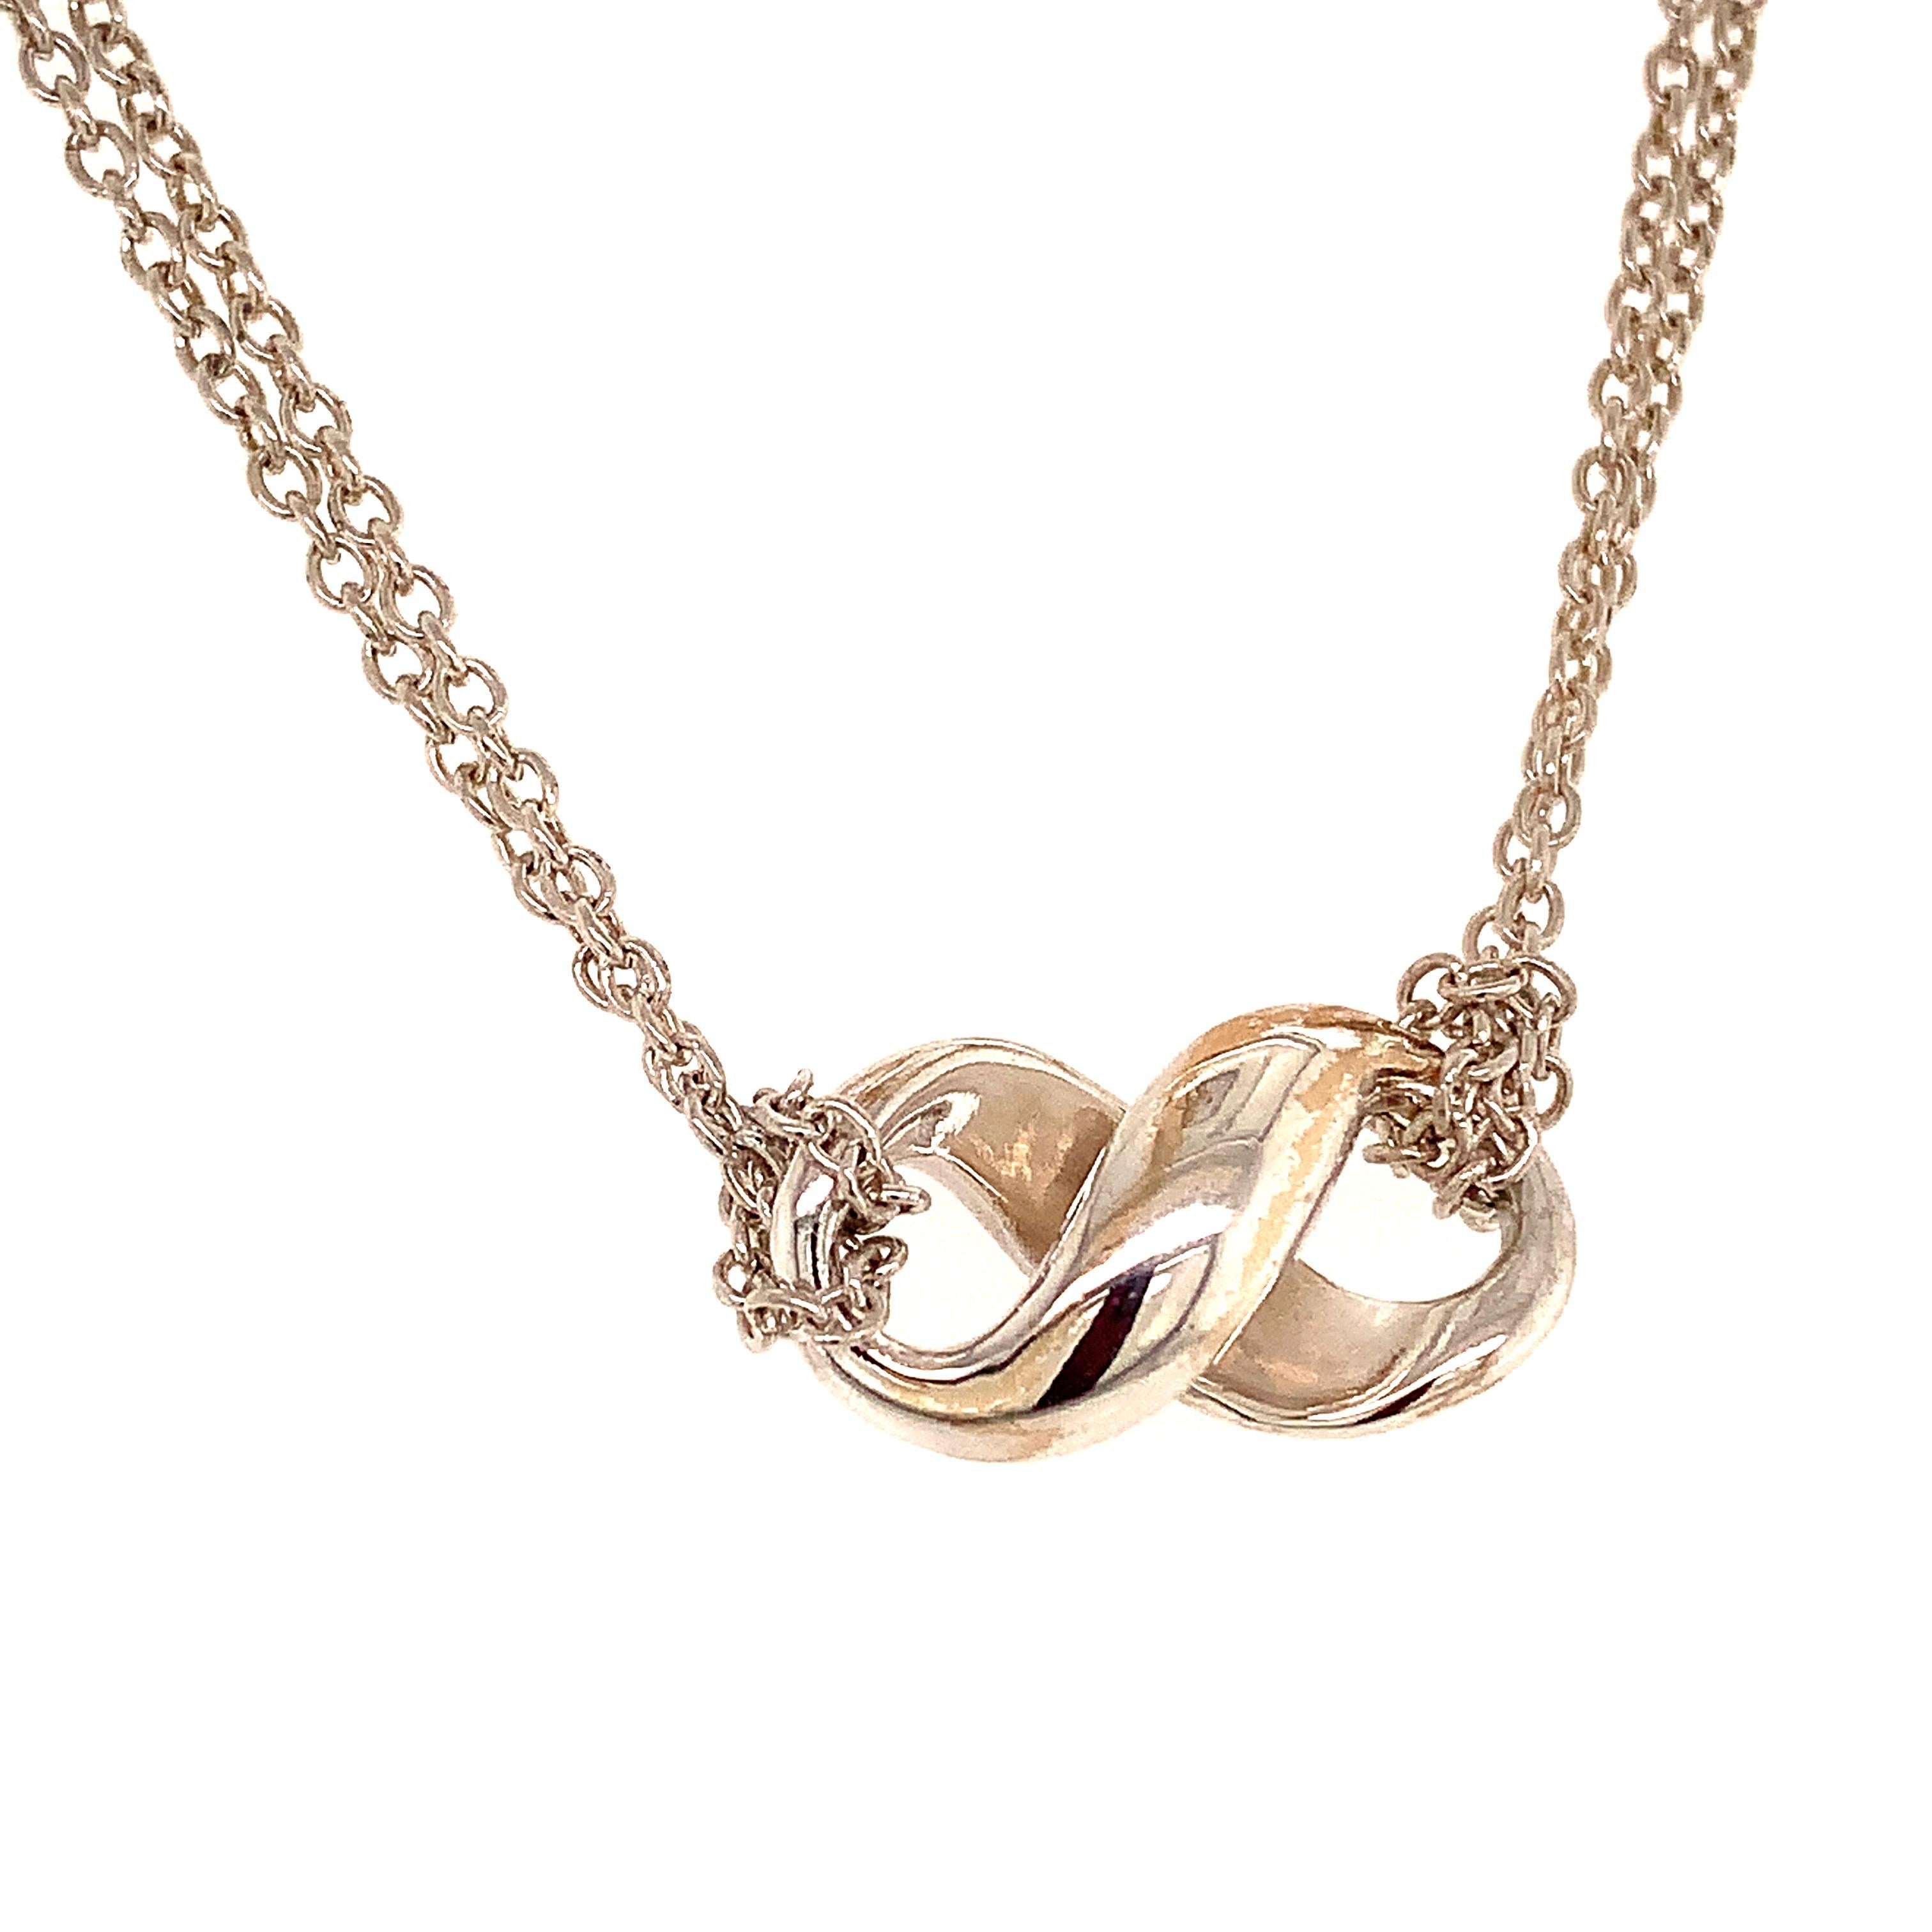 Tiffany & Co. Estate Double Chain Infinity Necklace Sterling Silver In Good Condition For Sale In Brooklyn, NY